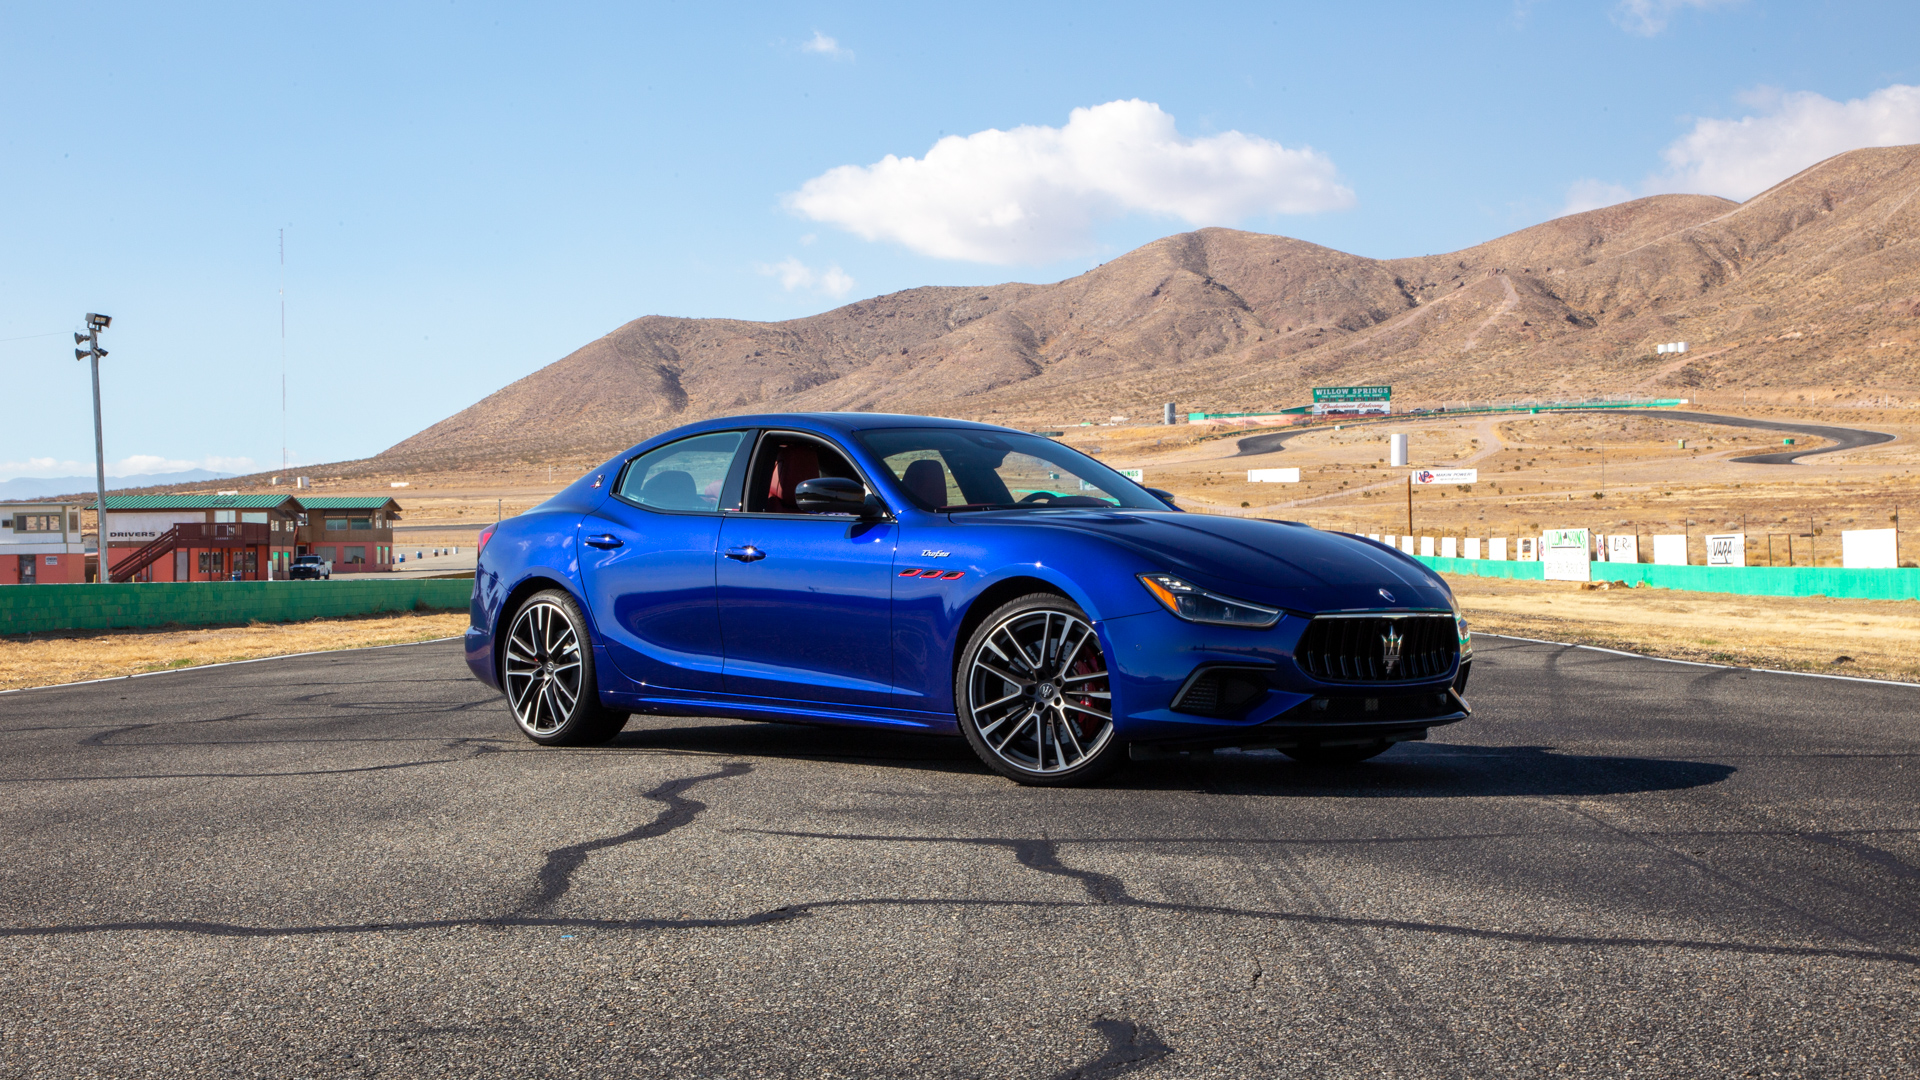 First drive review: 2021 Maserati Ghibli Trofeo adds substance to style